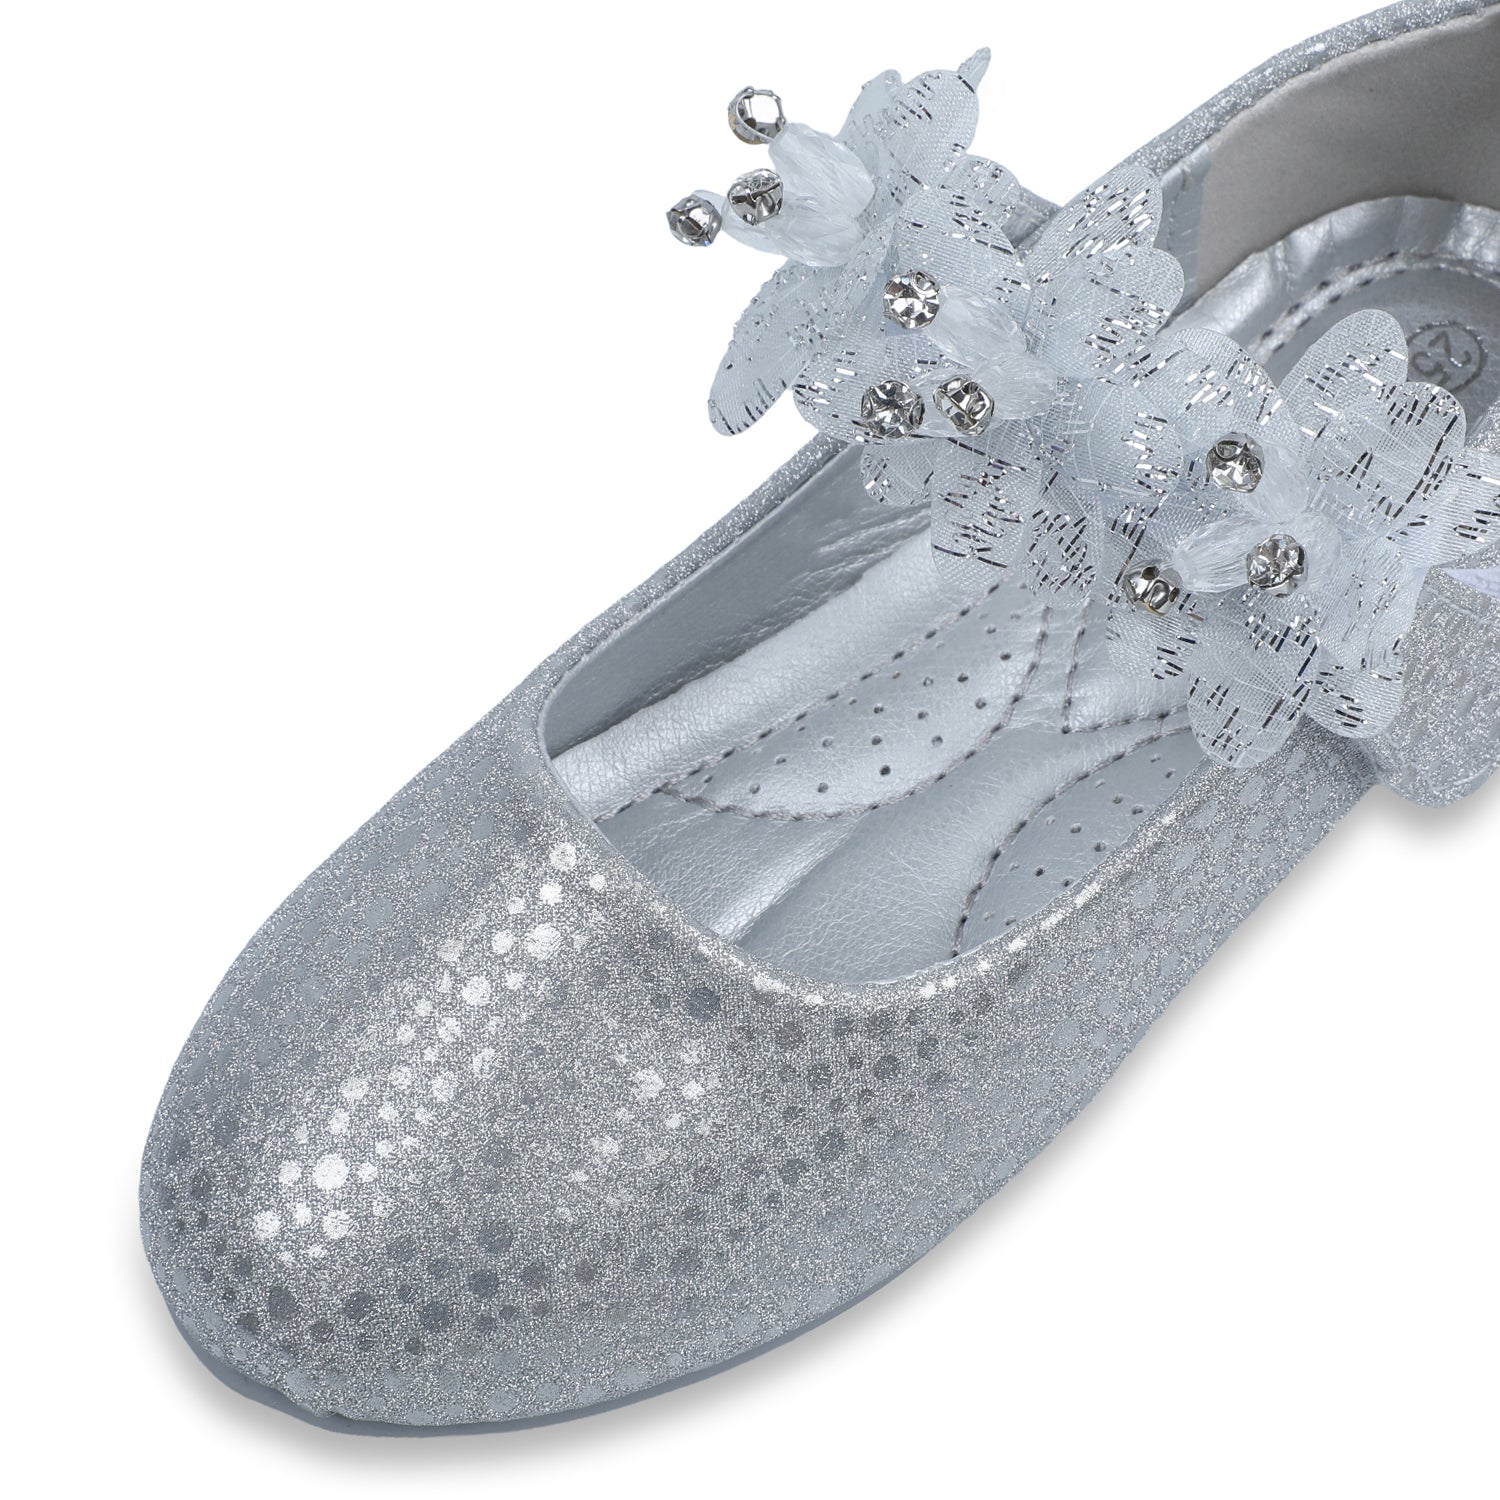 Baby Moo x Bash Kids Princess Floral Party Mary Jane Ballerinas - Silver